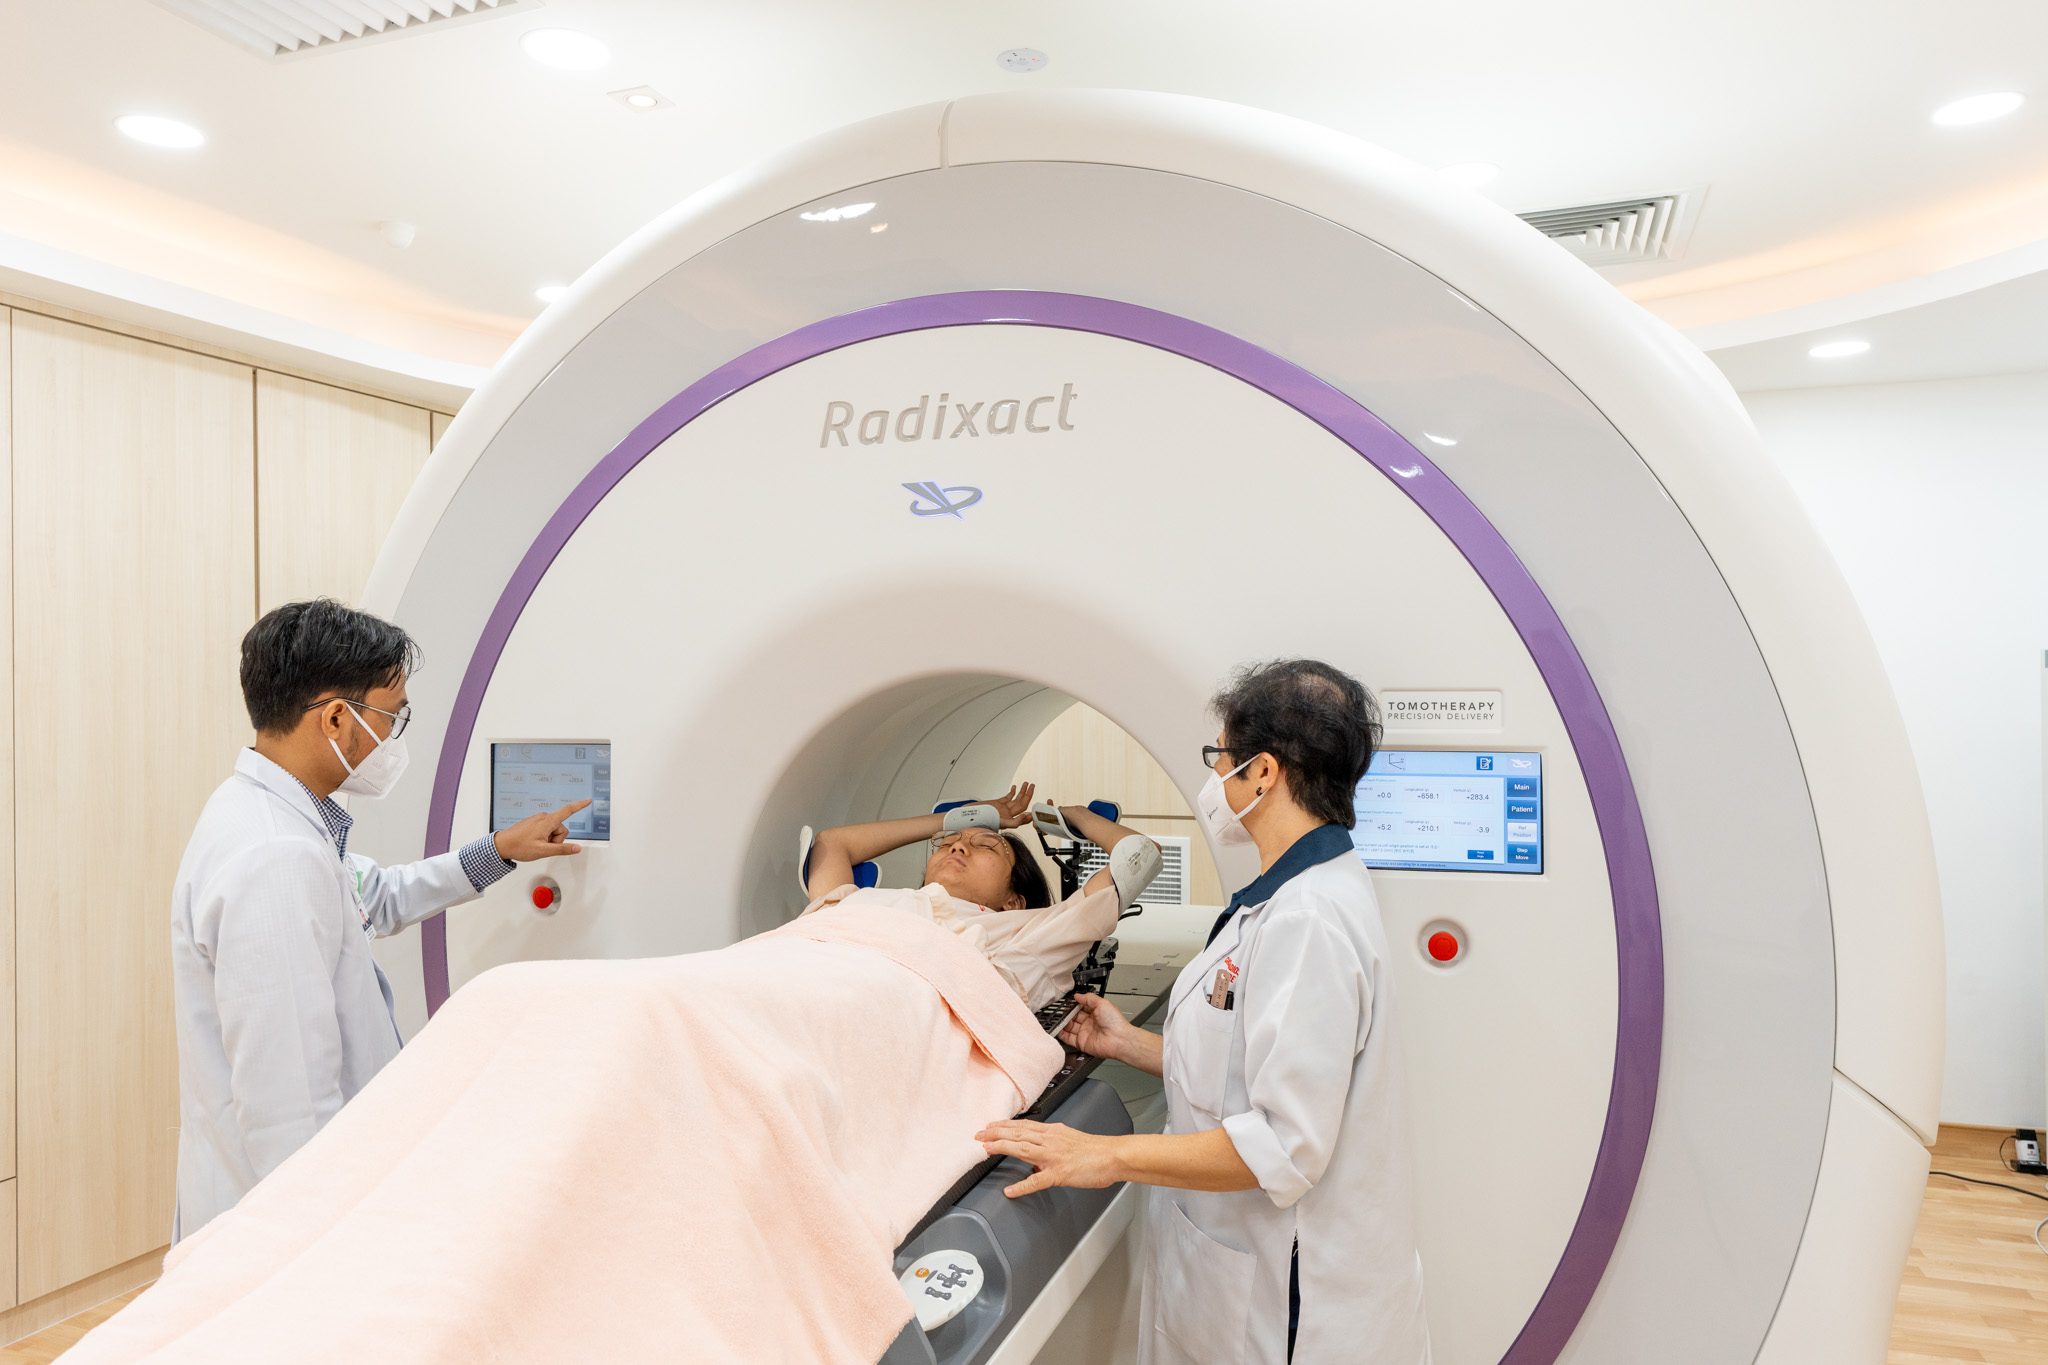 Subang jaya medical centre leads the way in oncology care as the first centre of excellence in asia pacific | weirdkaya